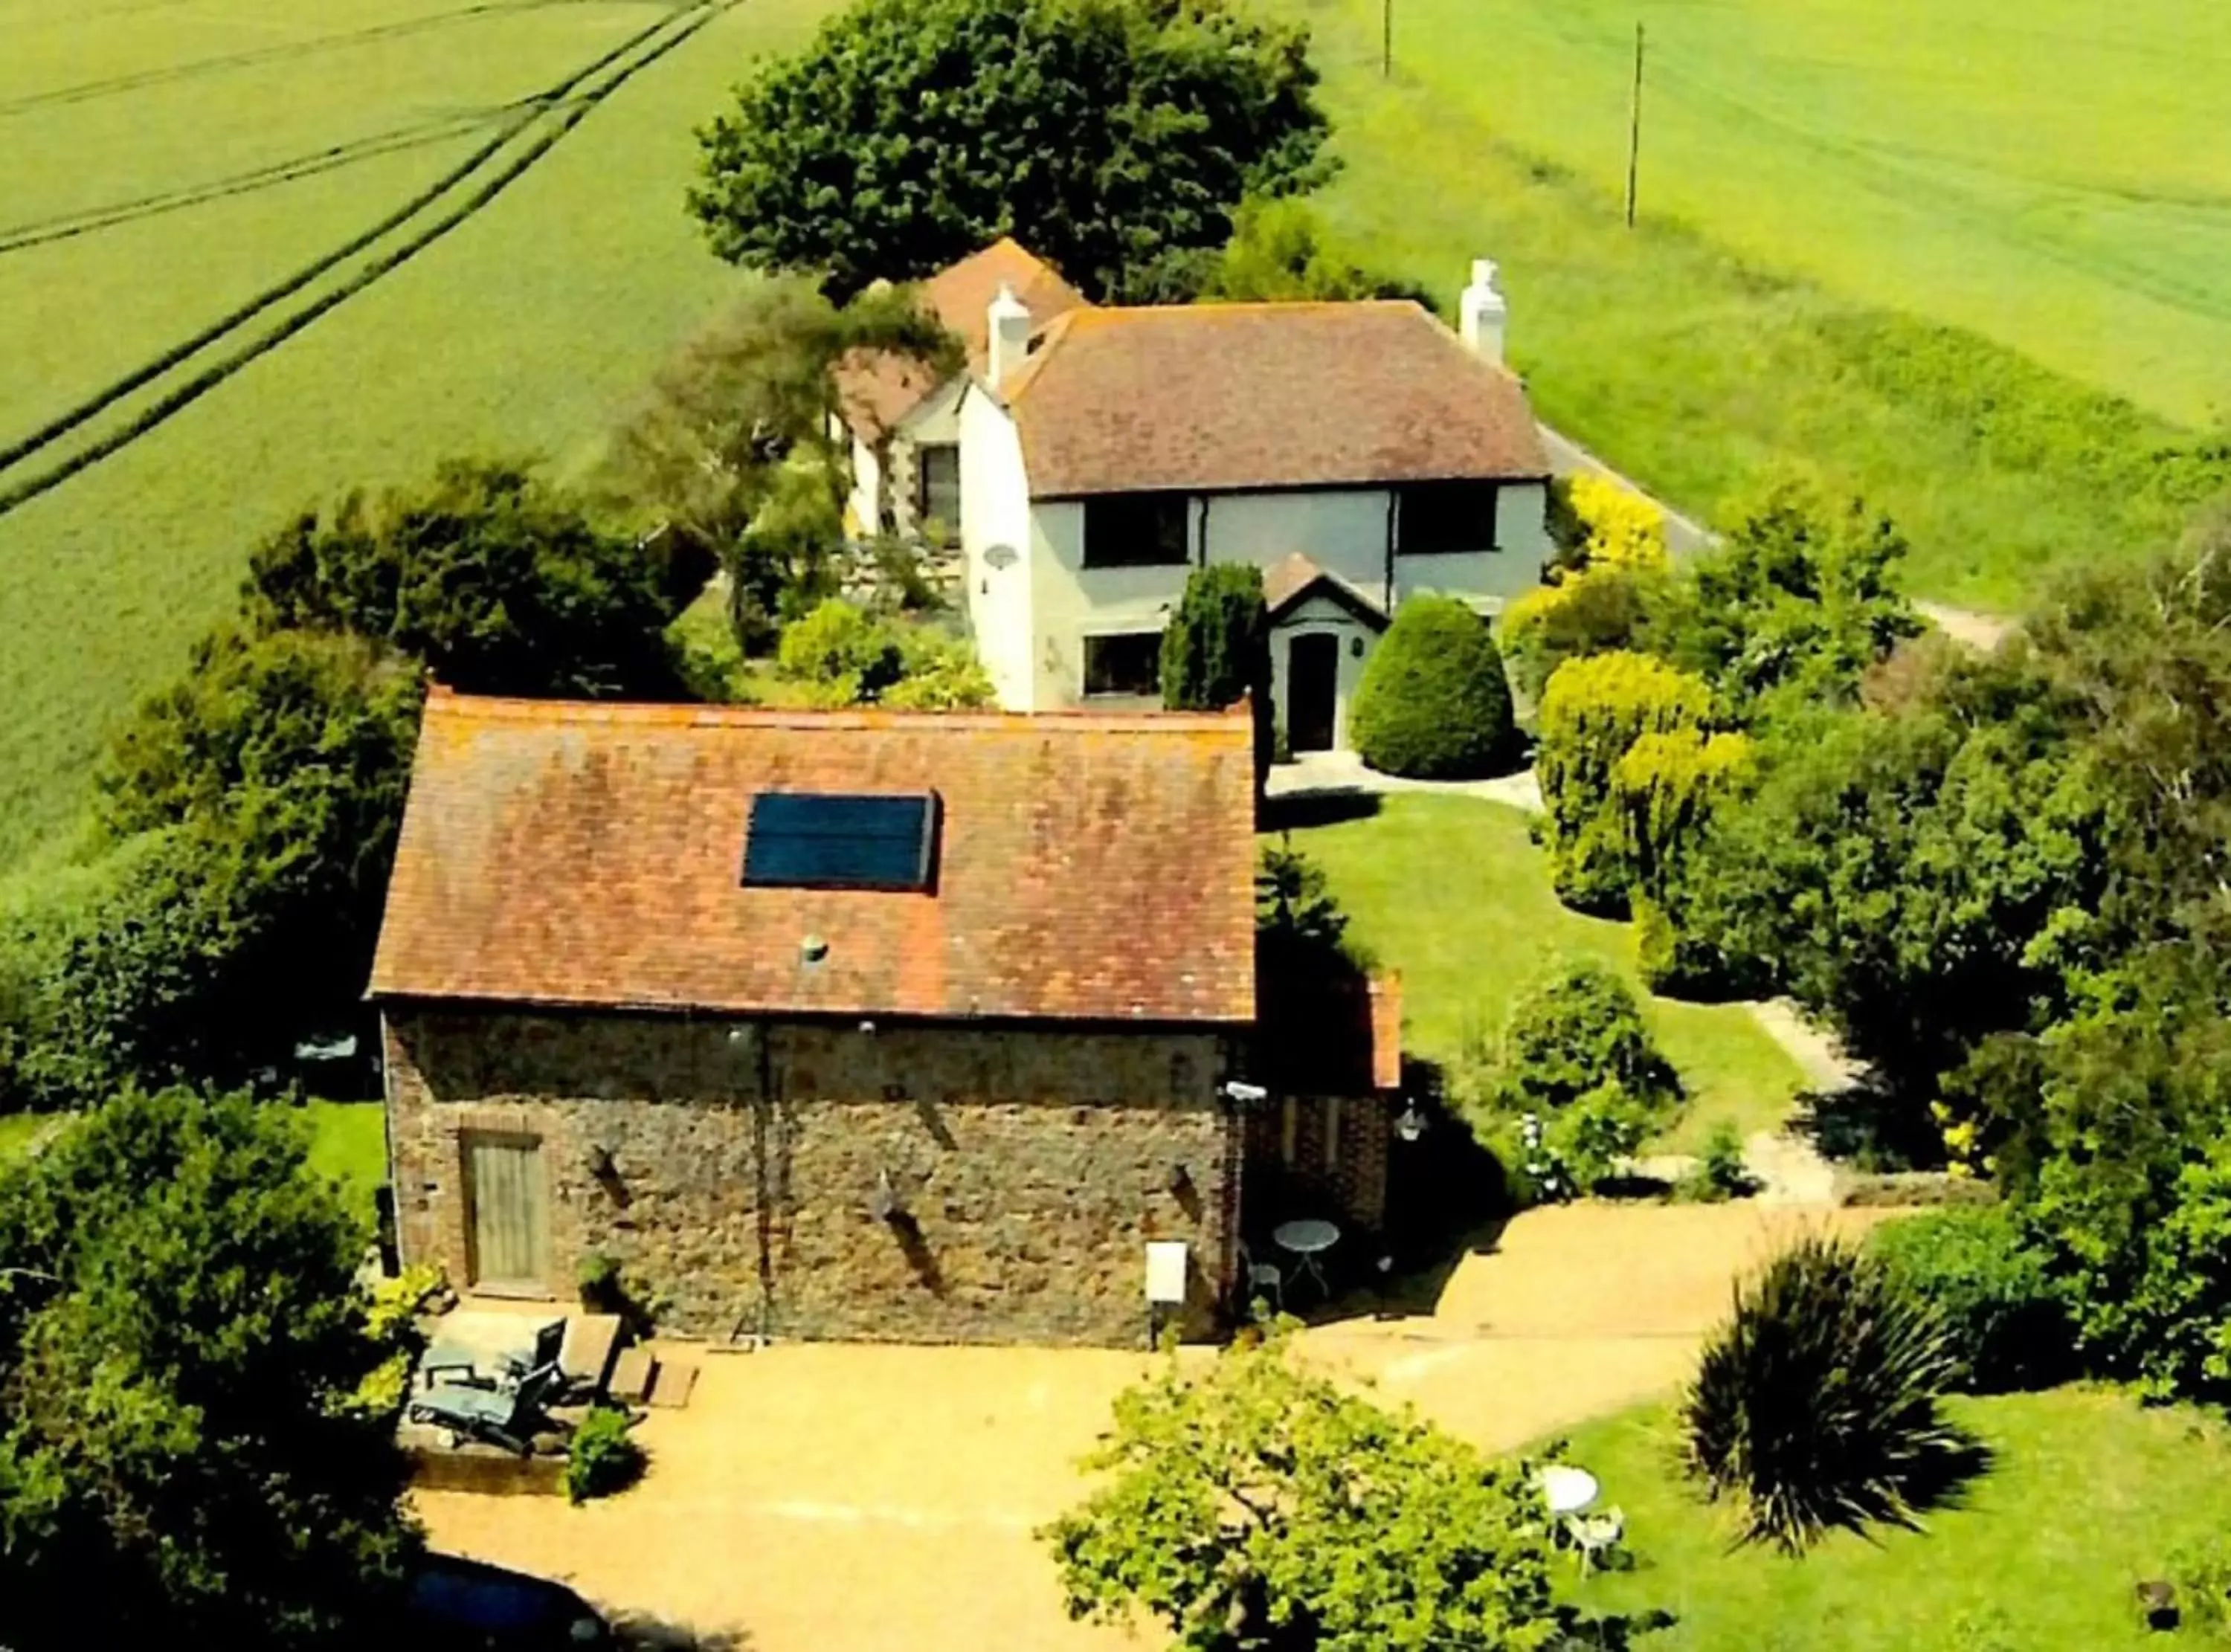 Bird's eye view, Bird's-eye View in Old Chapel Forge